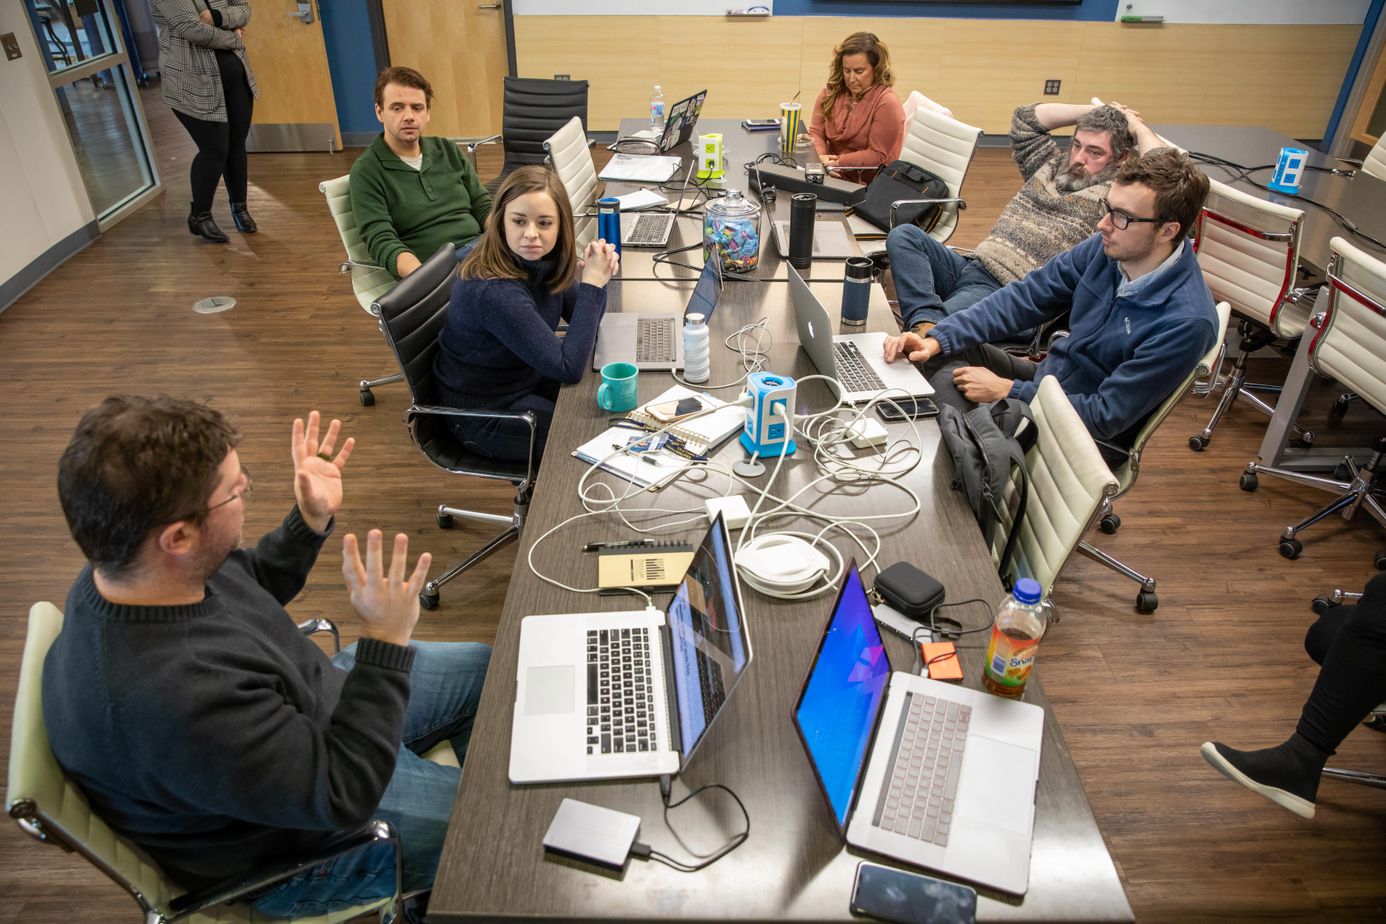 The 100 Days in Appalachia editorial team meets at the WVU Media Innovation Center.